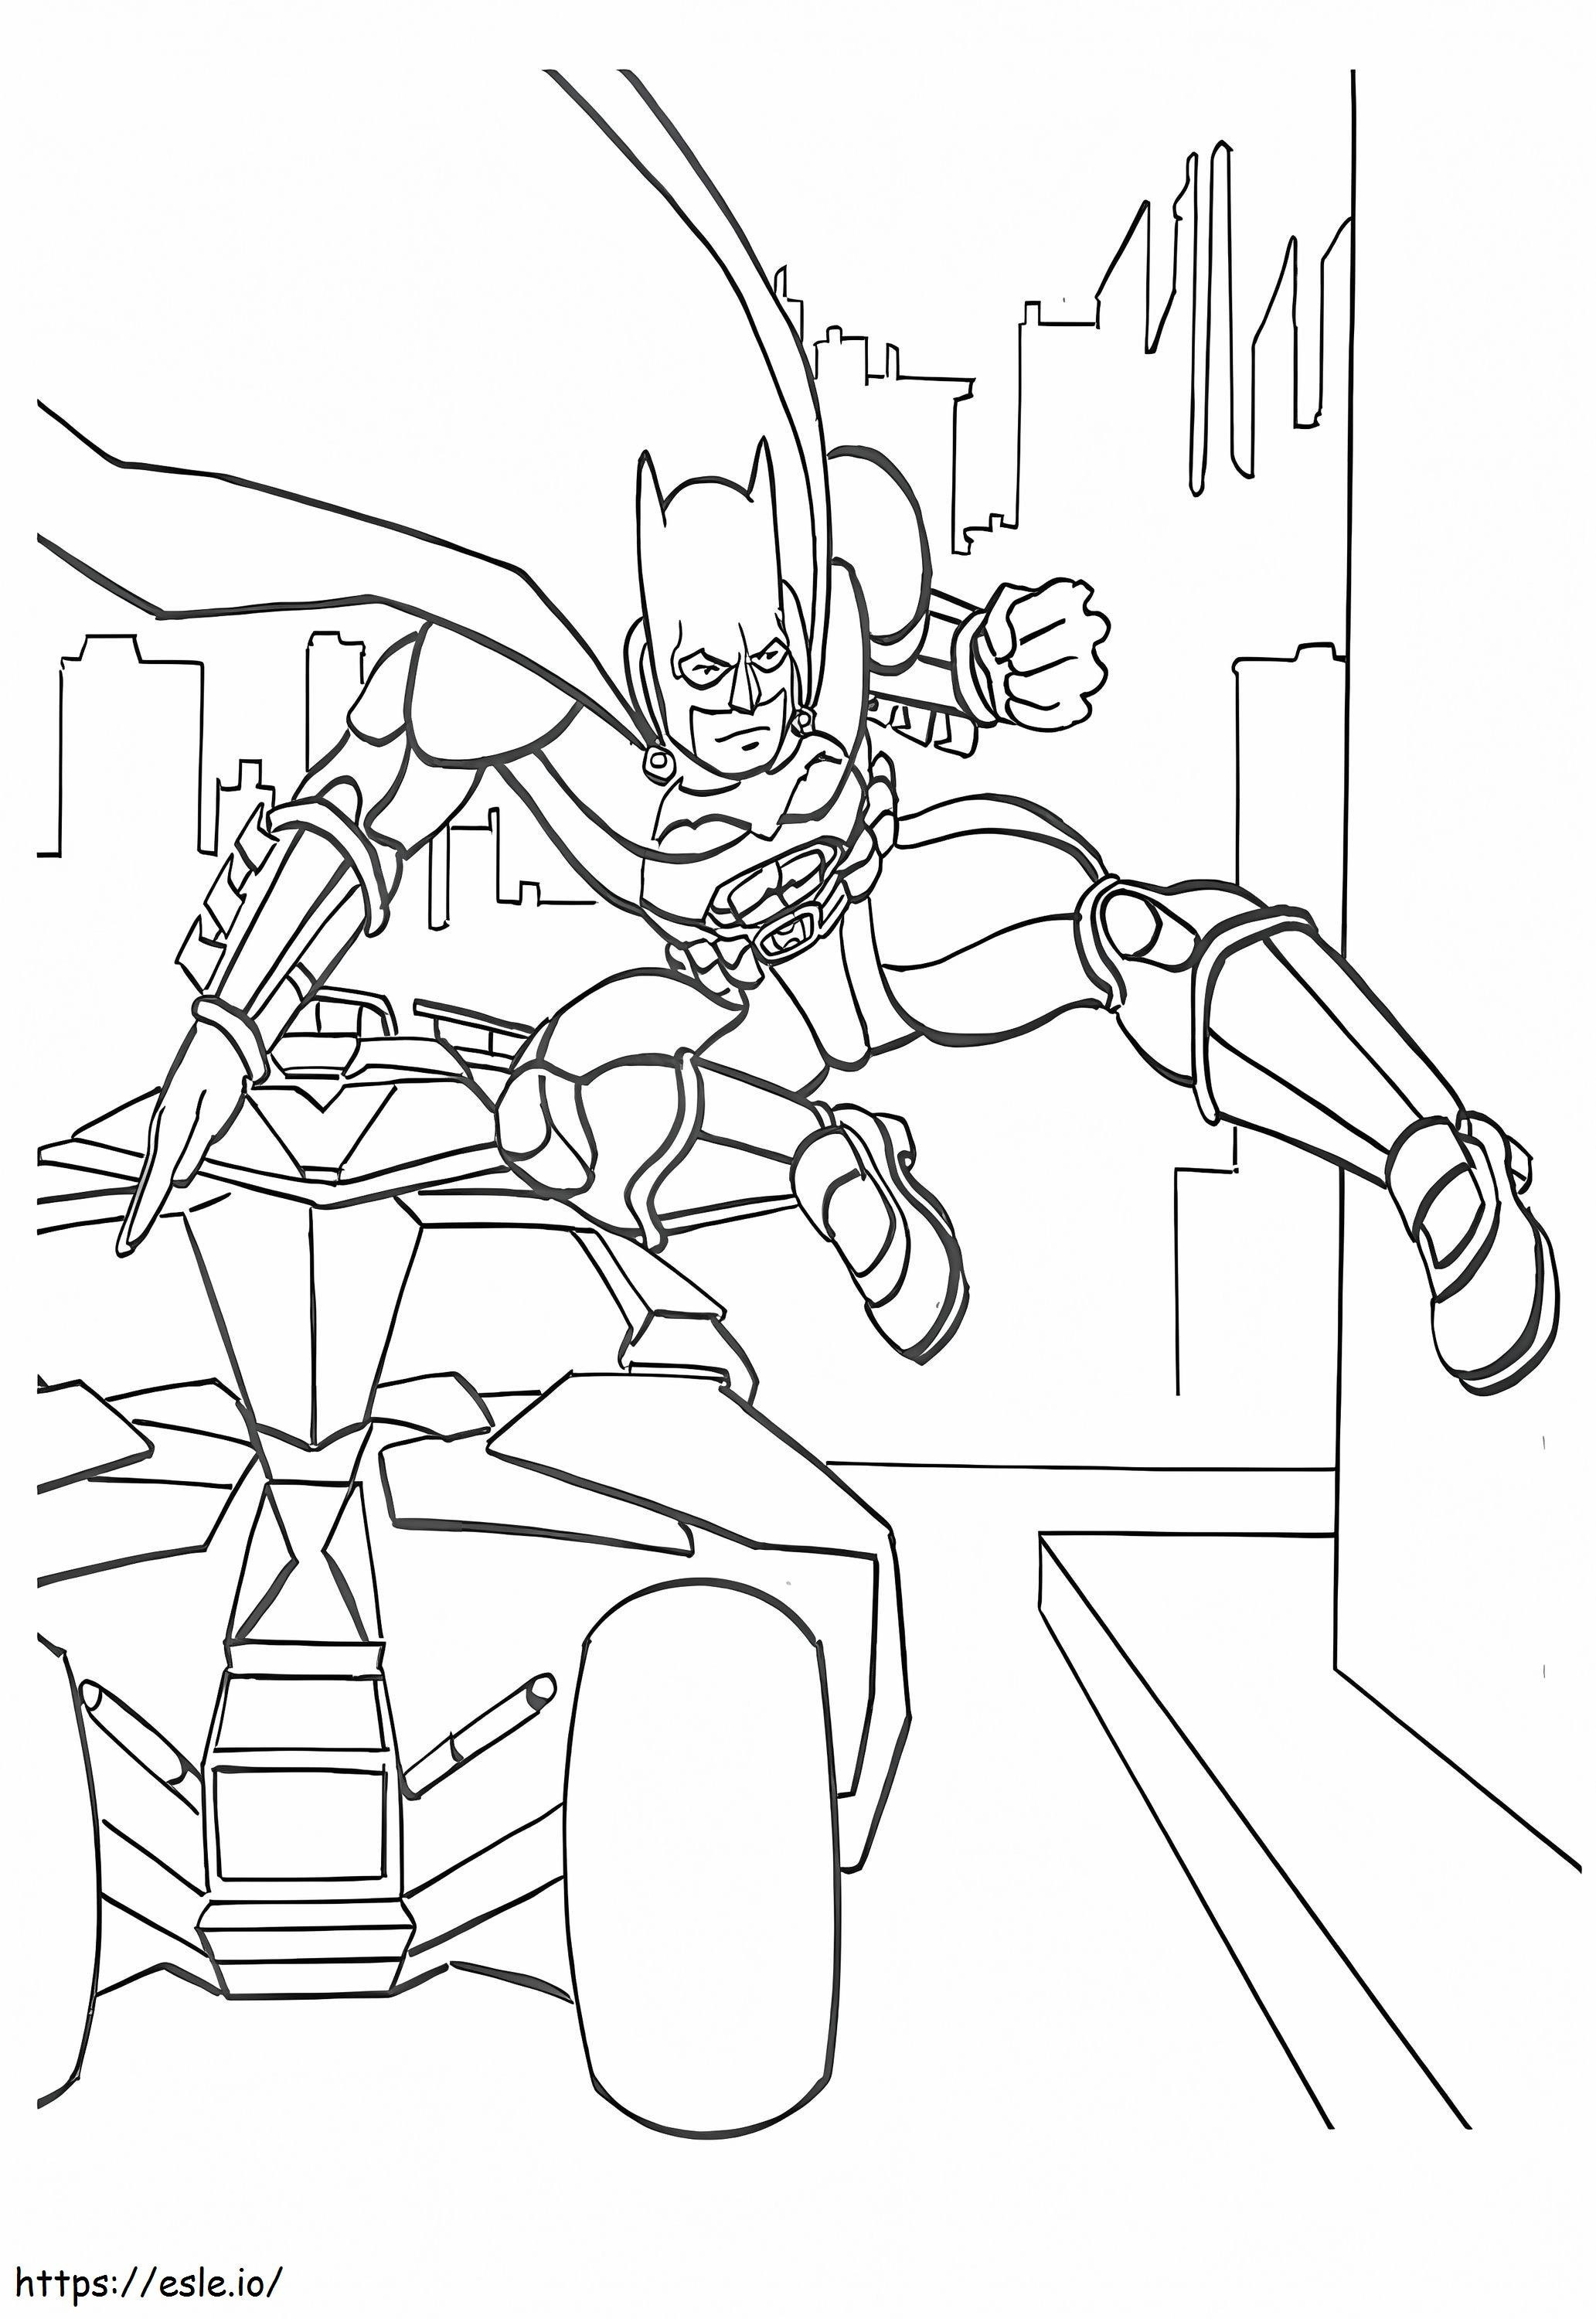 Batman In Action coloring page